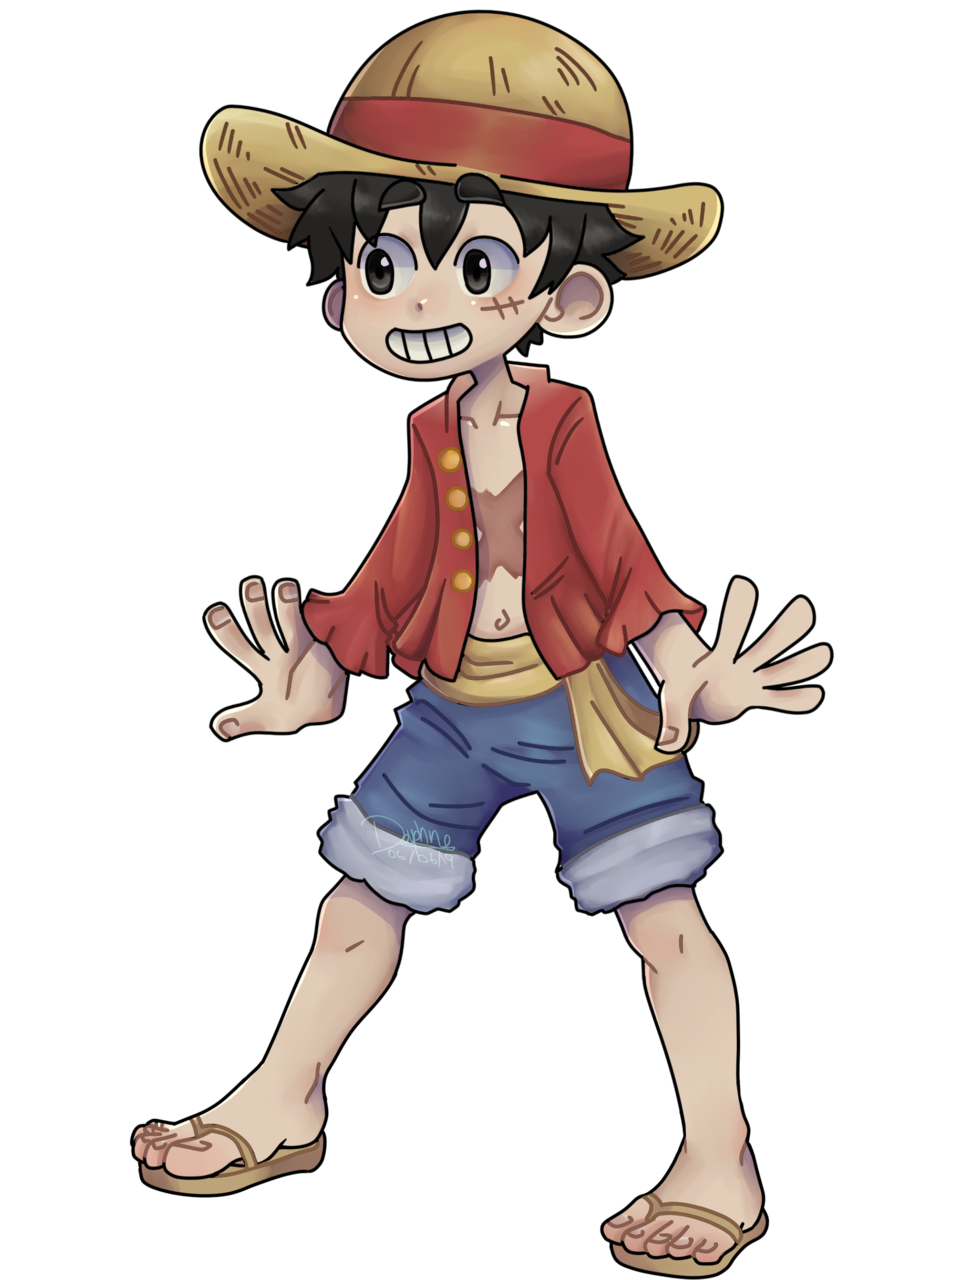 Download Picture Luffy Free HQ Image HQ PNG Image FreePNGImg.